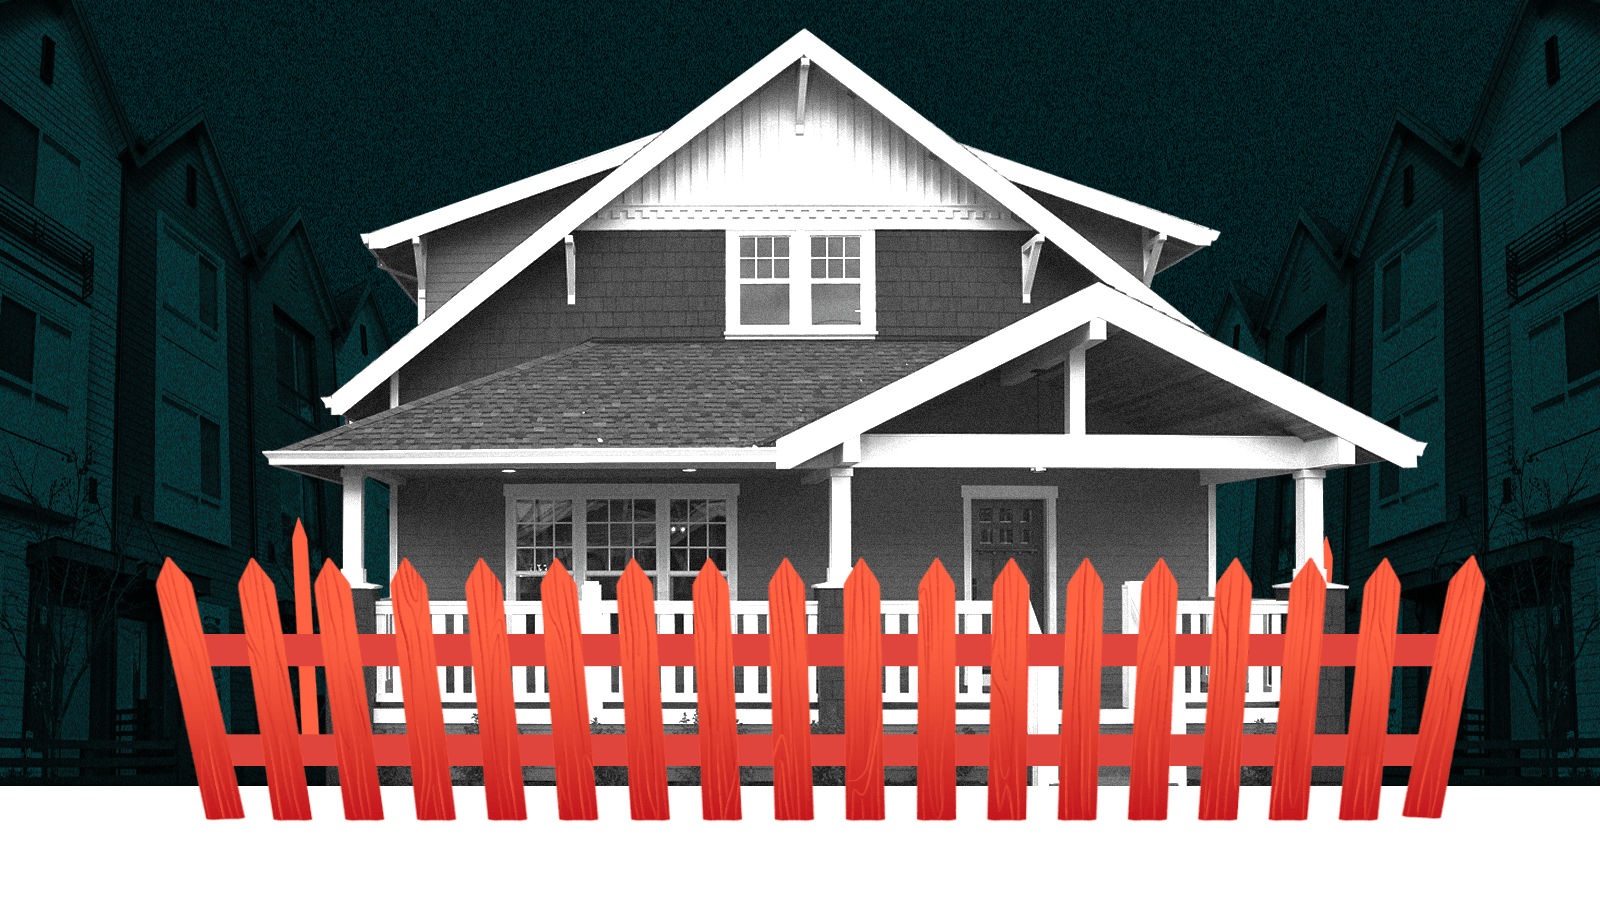 A large house with a red picket fence drawn around it and multi family housing on each side of the image